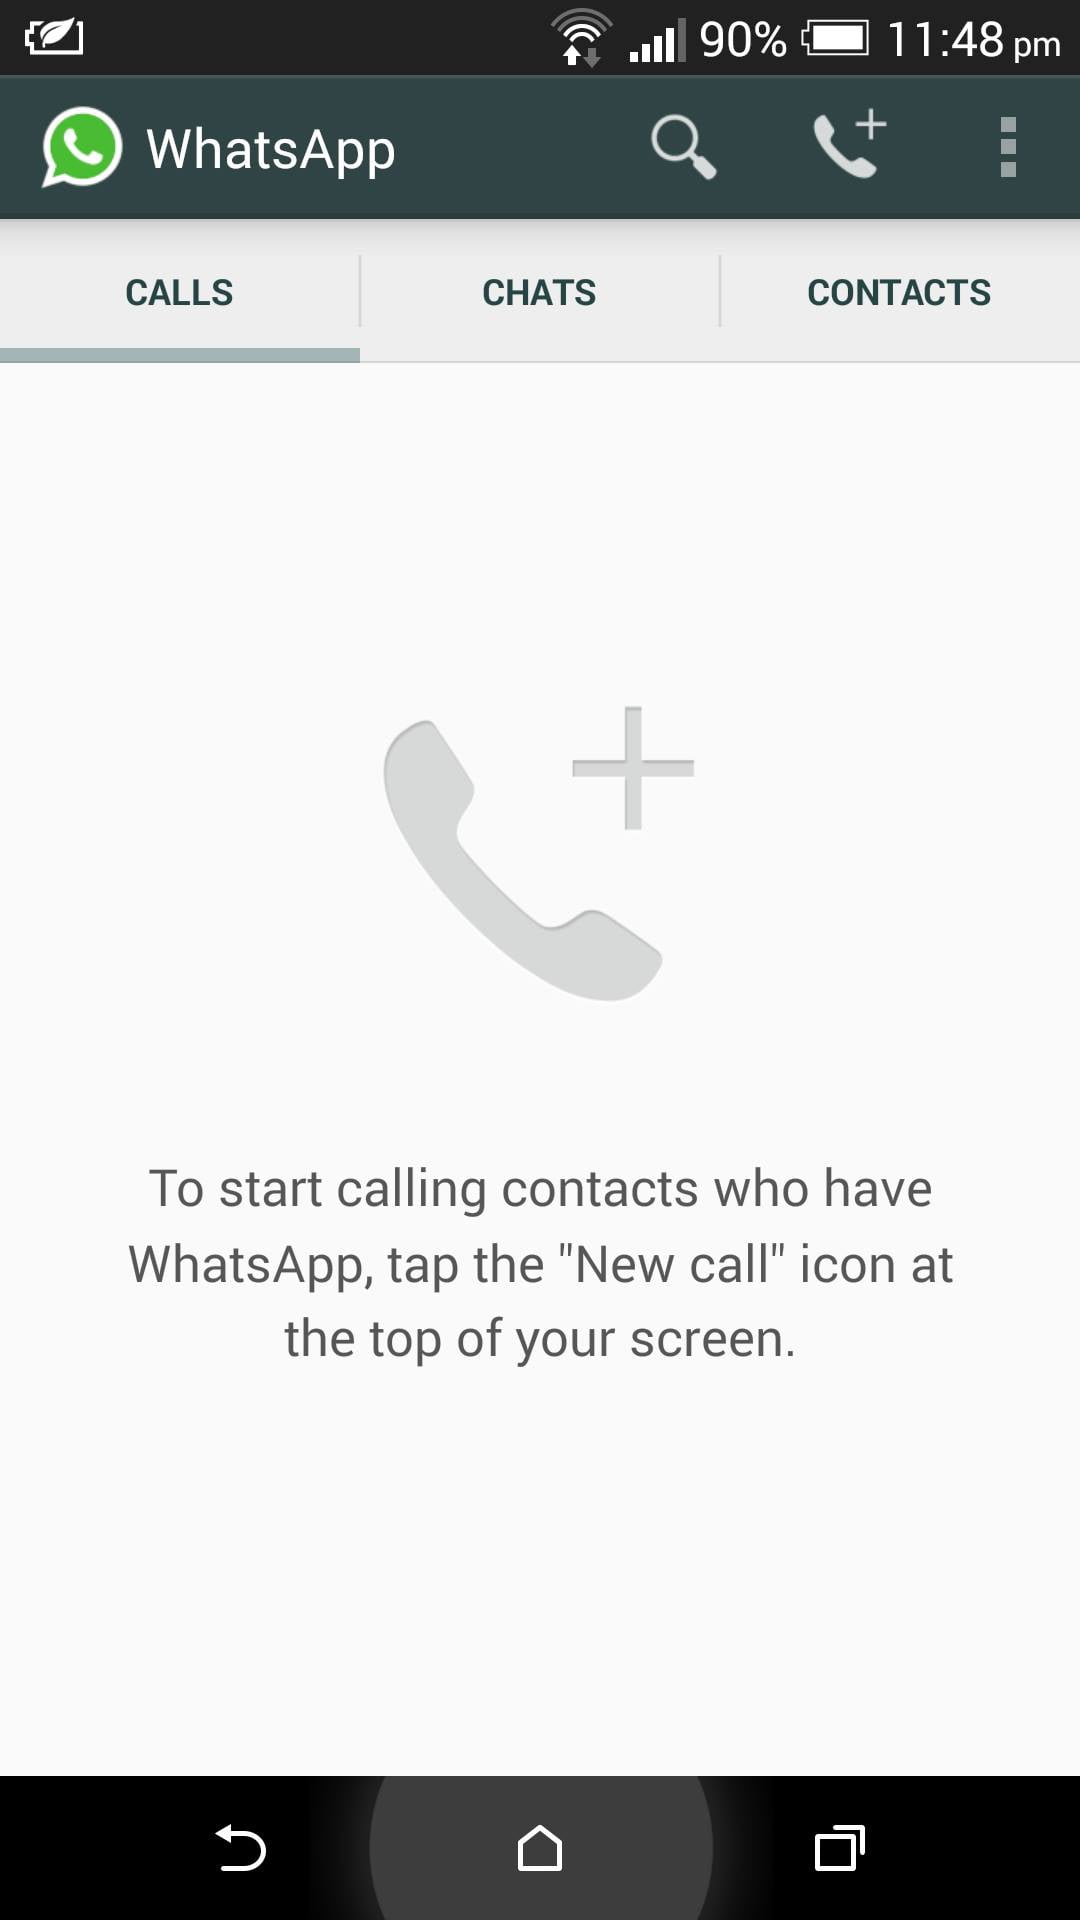 install whatsapp on my phone now download free